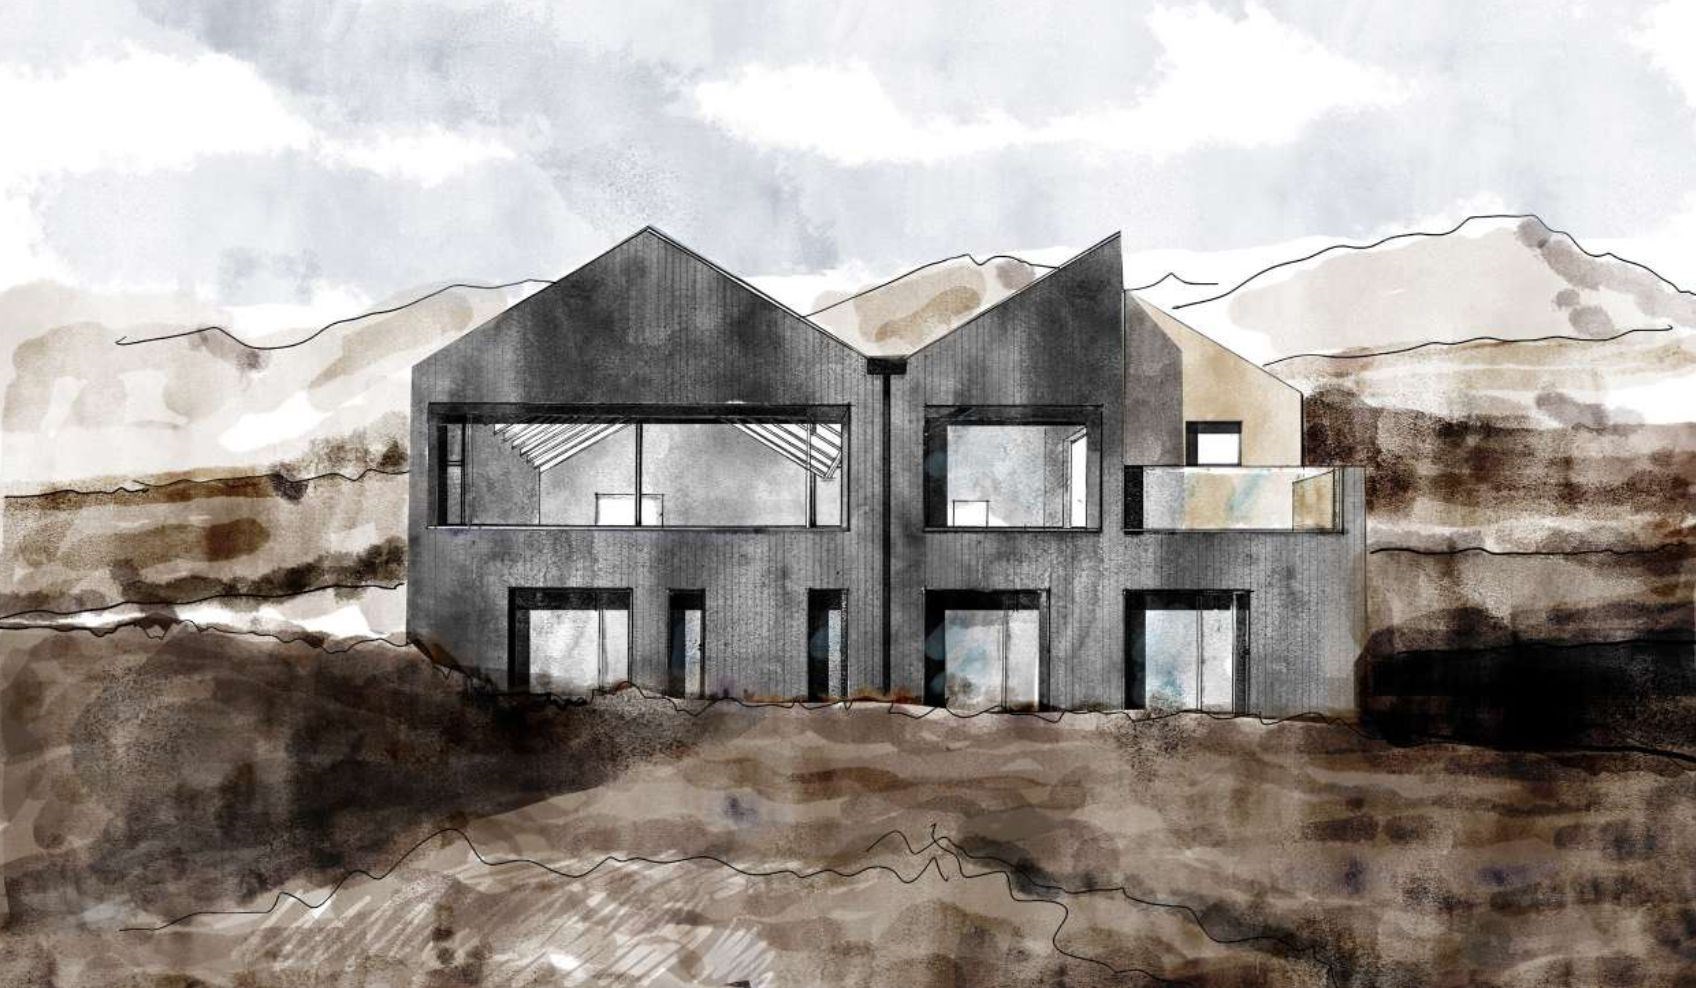 The artists' impression of the Ardmair house proposal from Simon Fraser to the Highland Council. Picture: Highland Council e-planning.